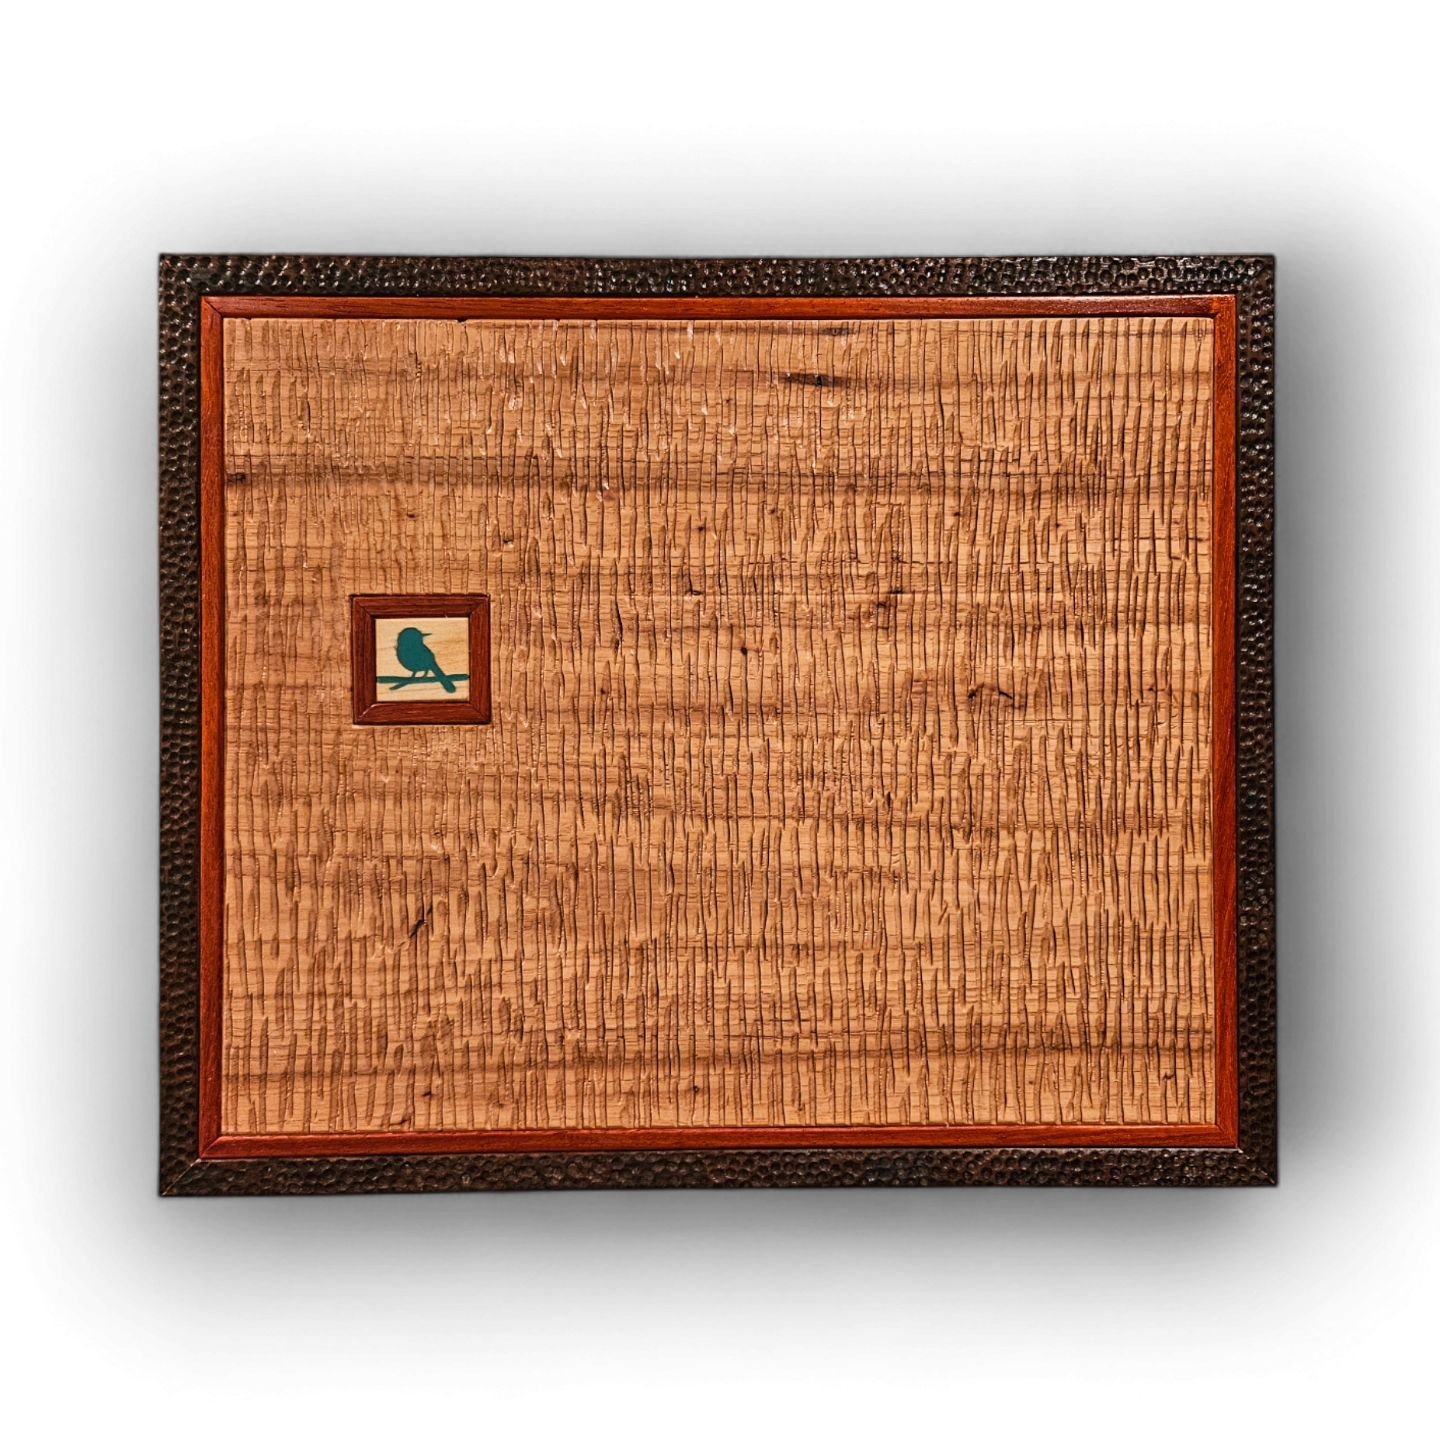 &quot;Enigmas&quot;, cont. (Segmented Wall Decors). Textured Texas Pecan, Padauk, Red Oak with layered acrylics, and some Turquoise. Approximately 22&quot; x 18&quot; x 1&quot;. www.hwrwood.art
:
:
:
#woodart, #finewoodart, #sculpture, #woodsculpture